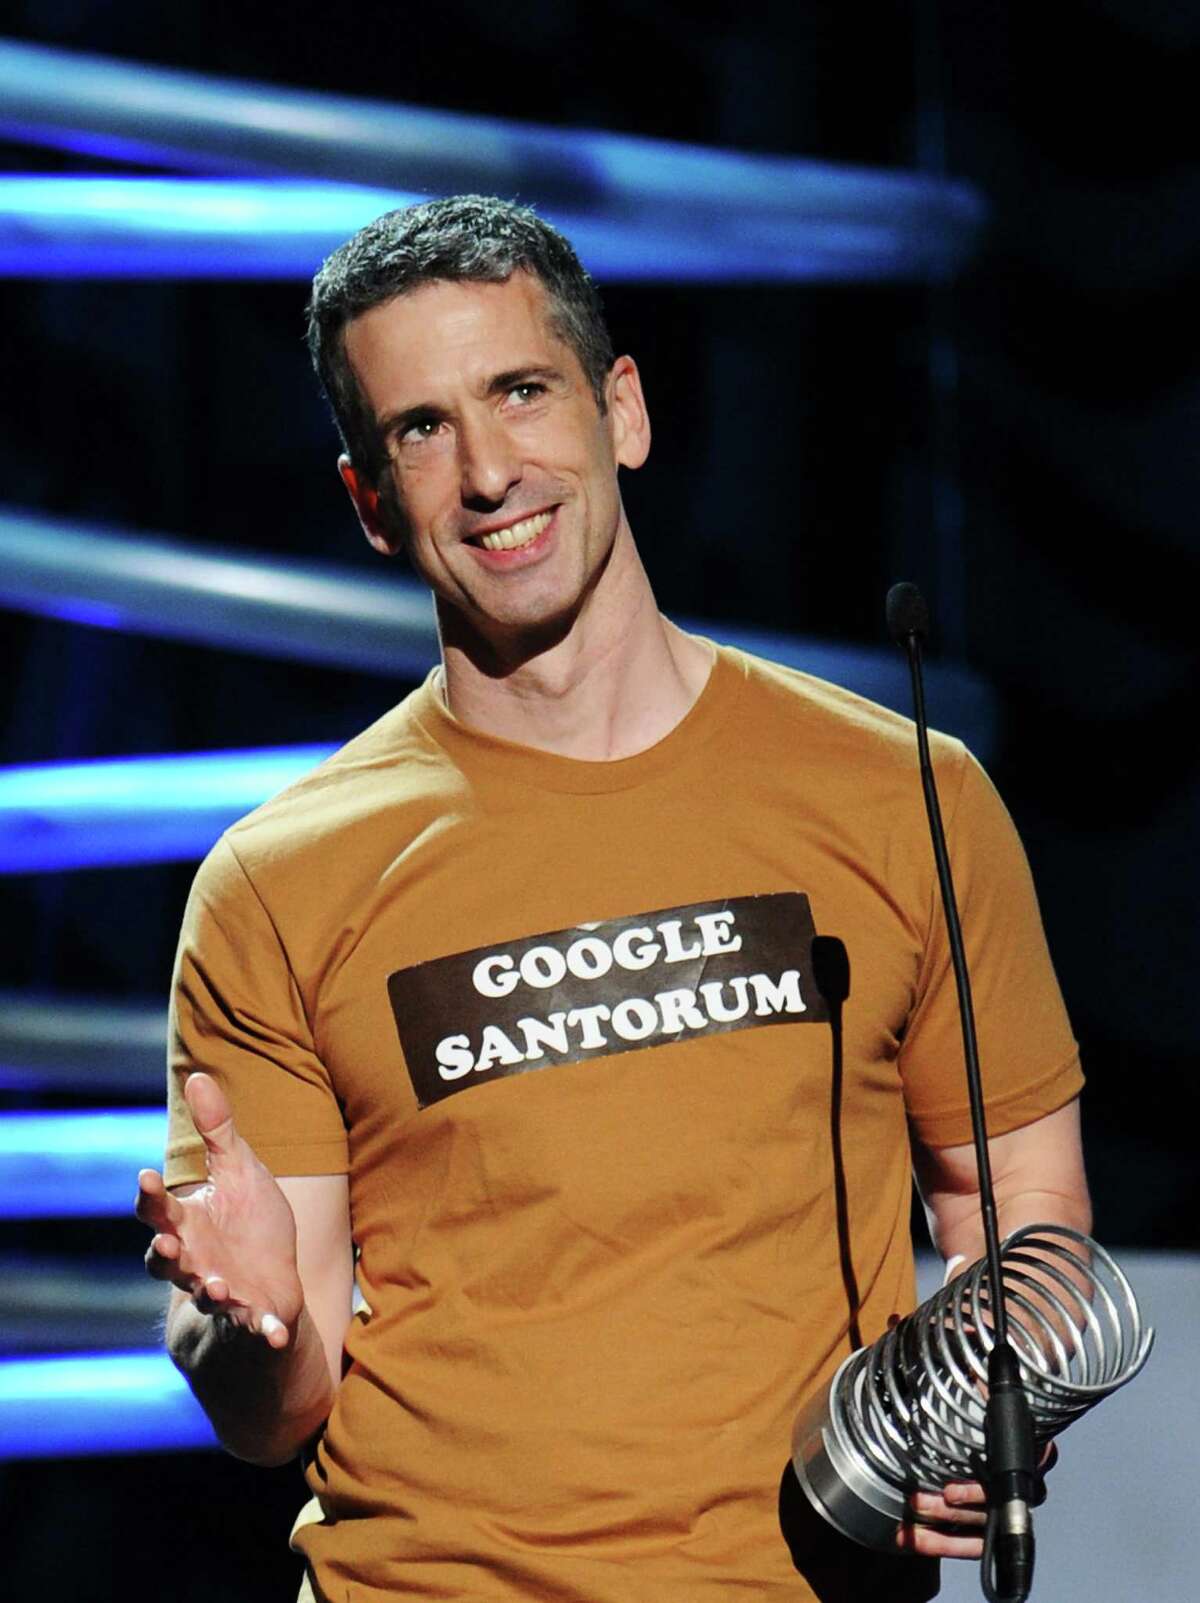 Dan Savage has mercilessly baited anti-gay politicians, from religious-right presidential candidate Gary Bauer more than a decade ago to ex-Sen. Rick Santorum in 2012.